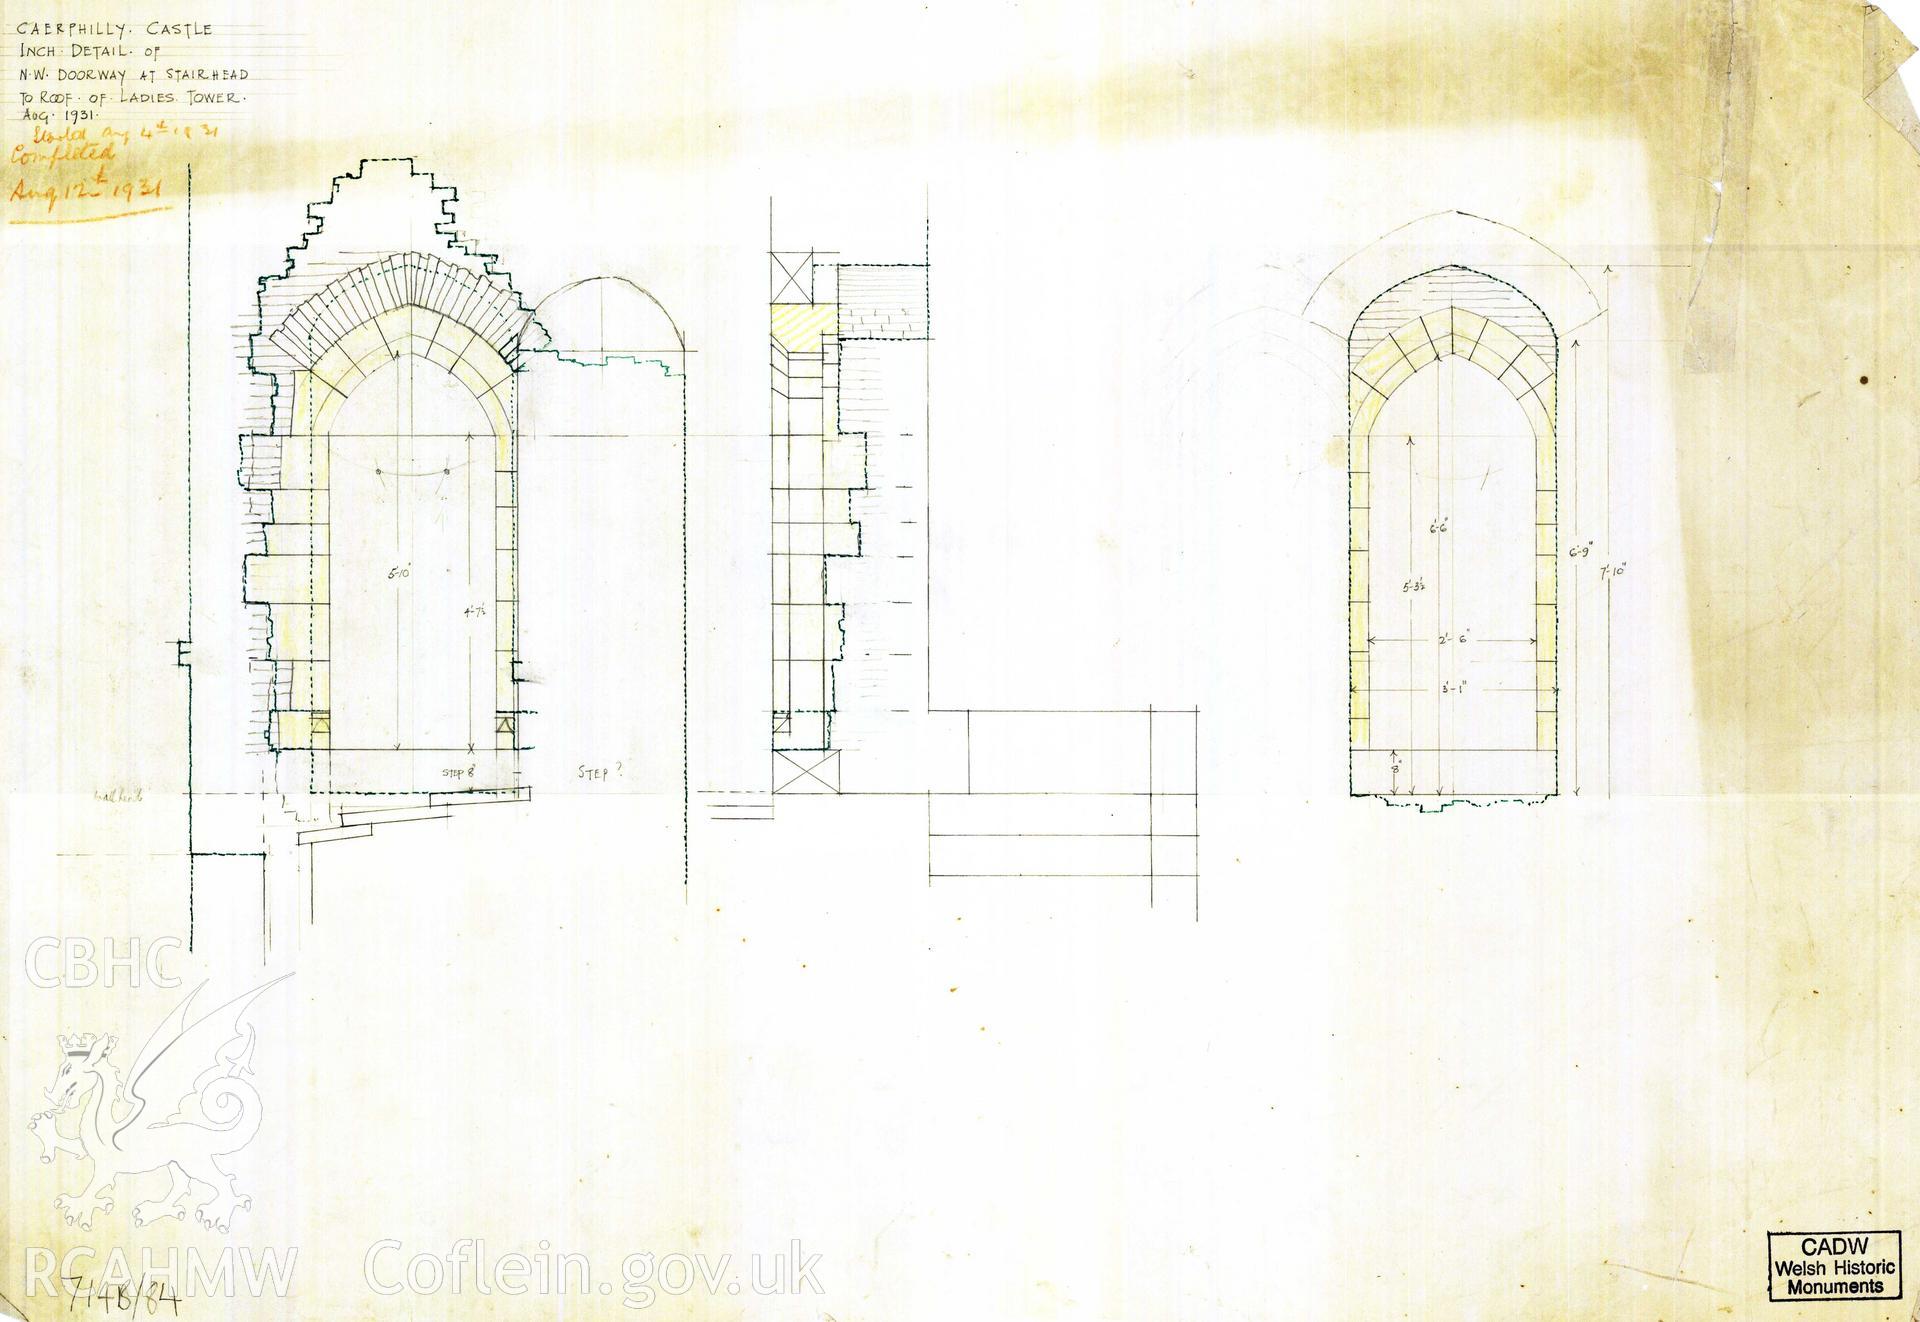 Digital copy of Cadw guardianship monument drawing of Caerphilly Castle. NW tower, door to roof. Cadw ref. no: 714B/84. Scale 1:12. Original drawing withdrawn and returned to Cadw at their request.